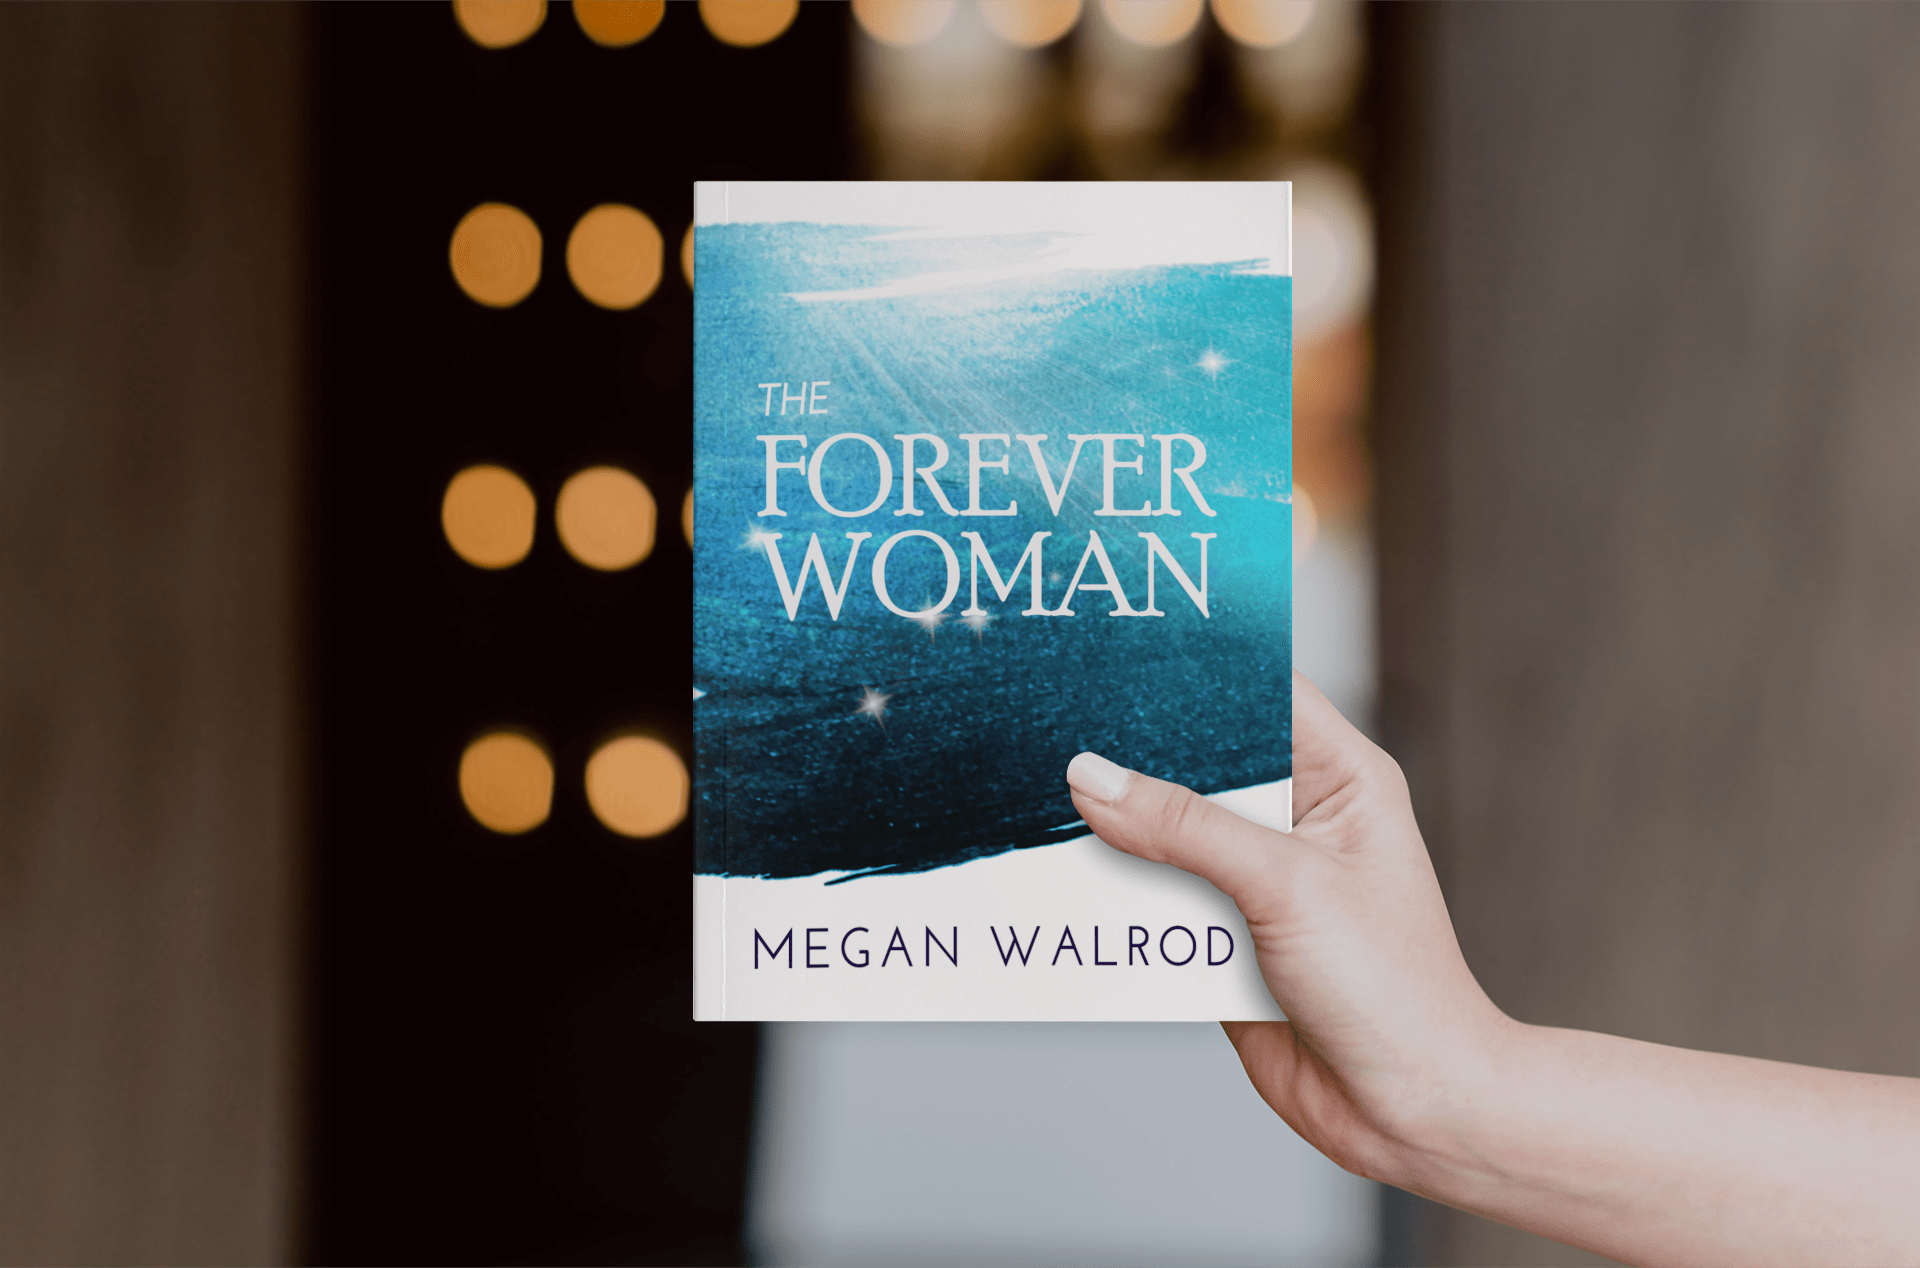 The Forever Woman: A Debut Novel by Megan Walrod | Indiegogo